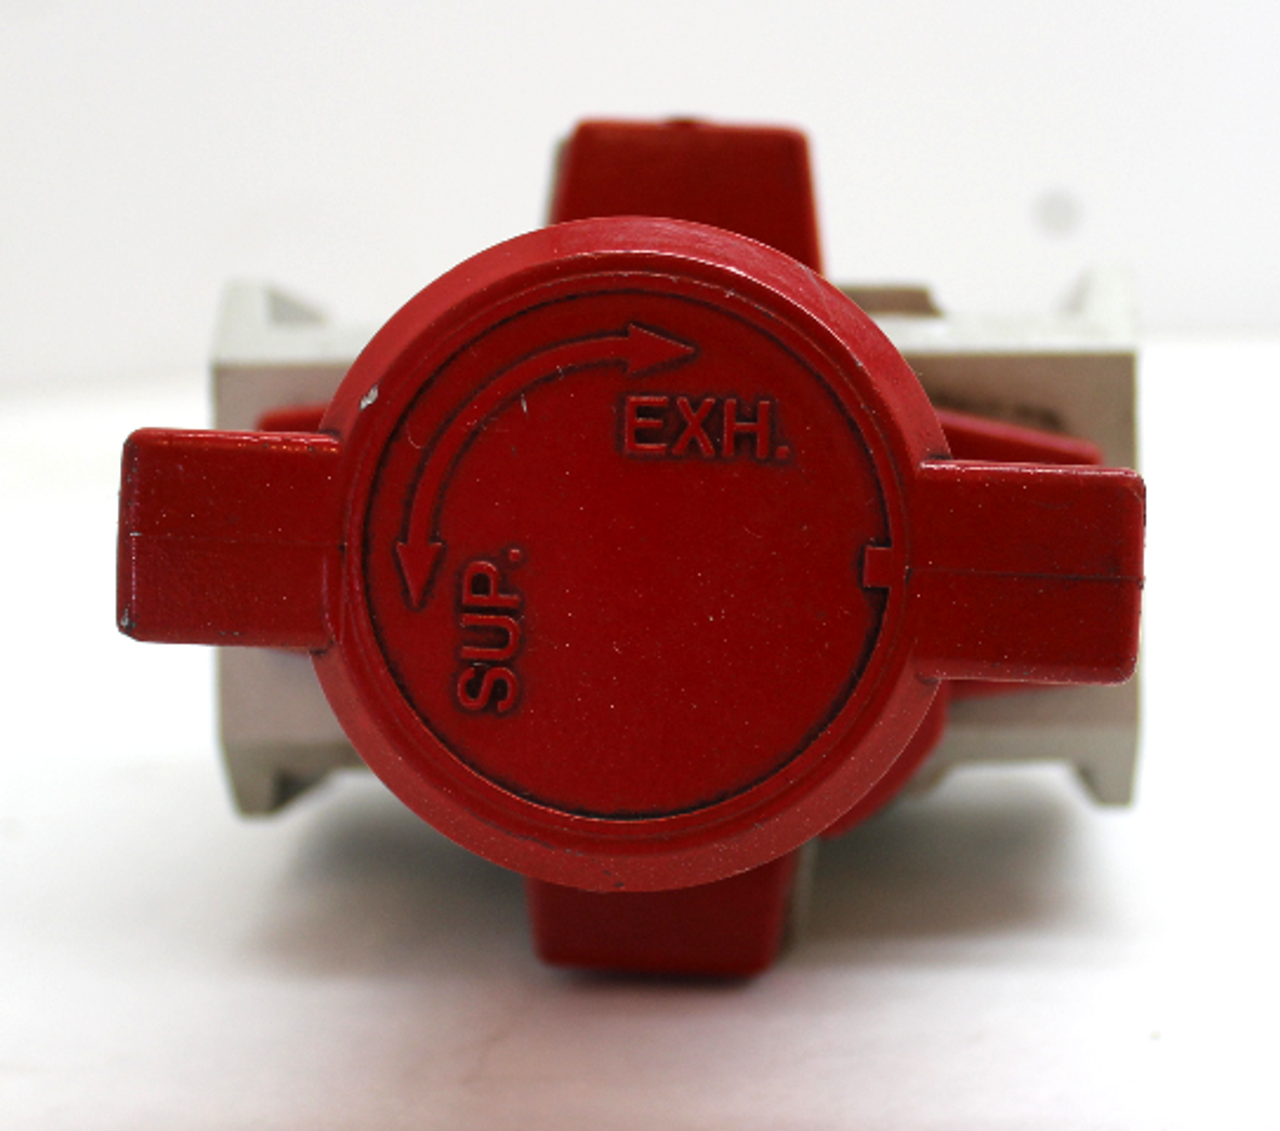 SMC NVHS5500-N06-X116 Lock Out Valve